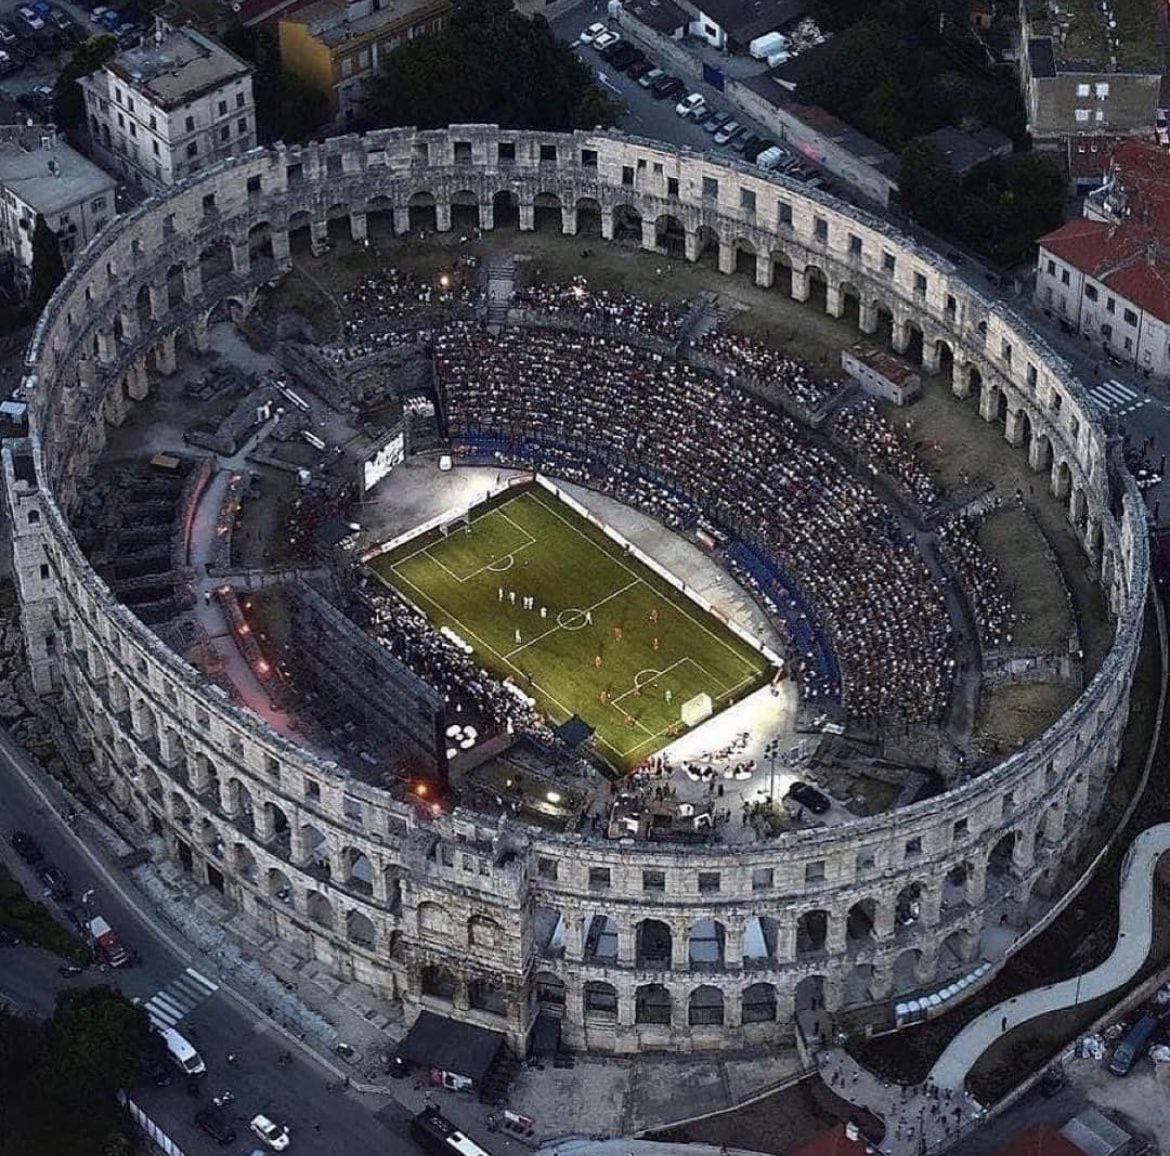 A soccer game being played in the 2,000-year-old Pula Arena amphitheater in Croatia.